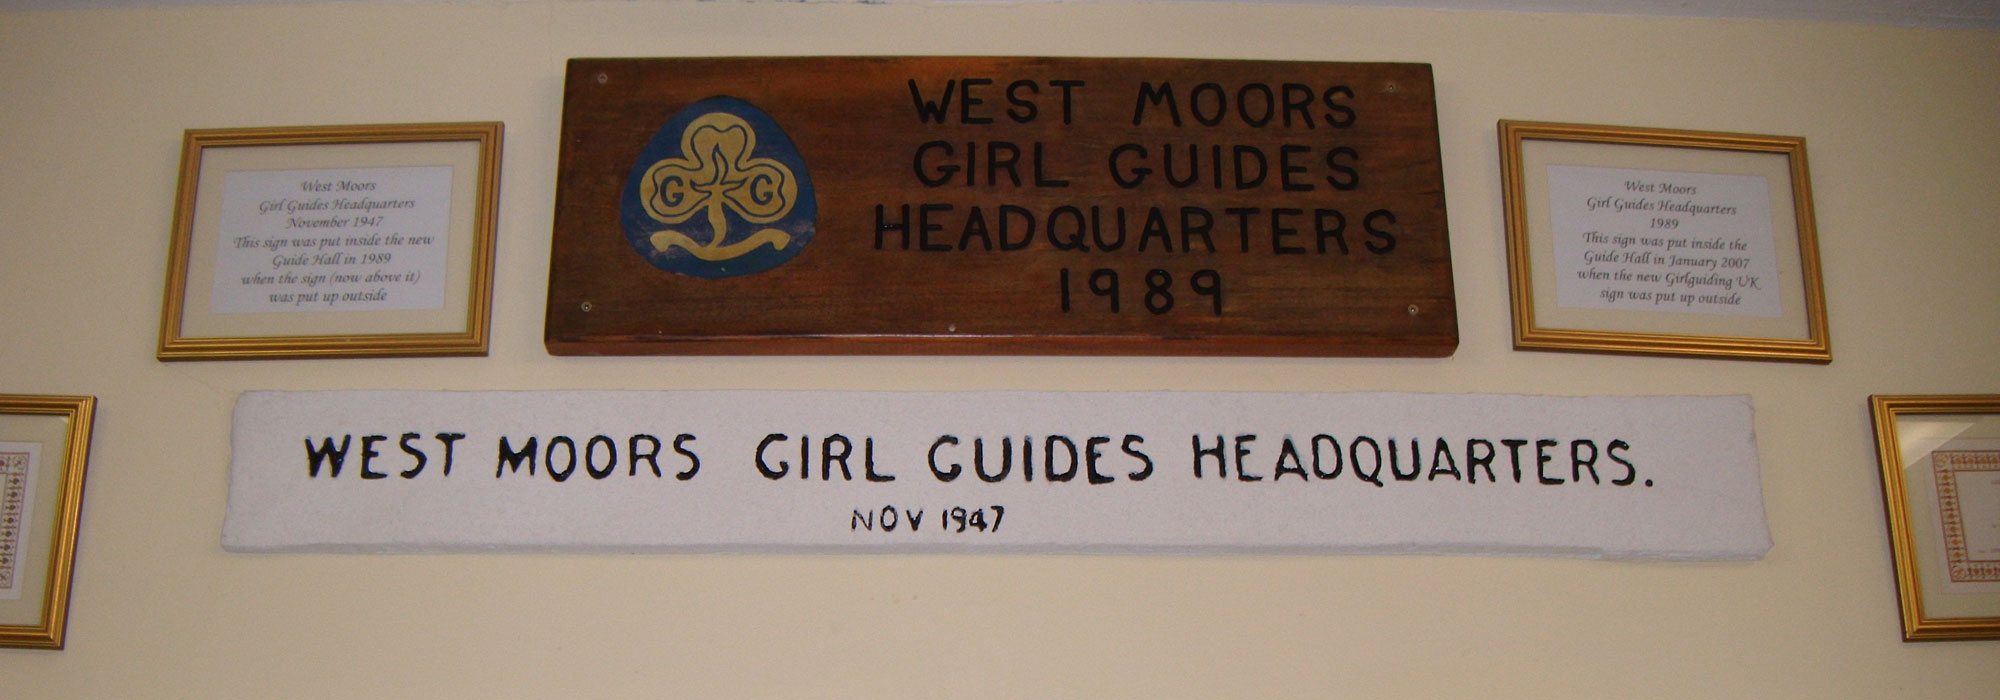 Guide Hall signs